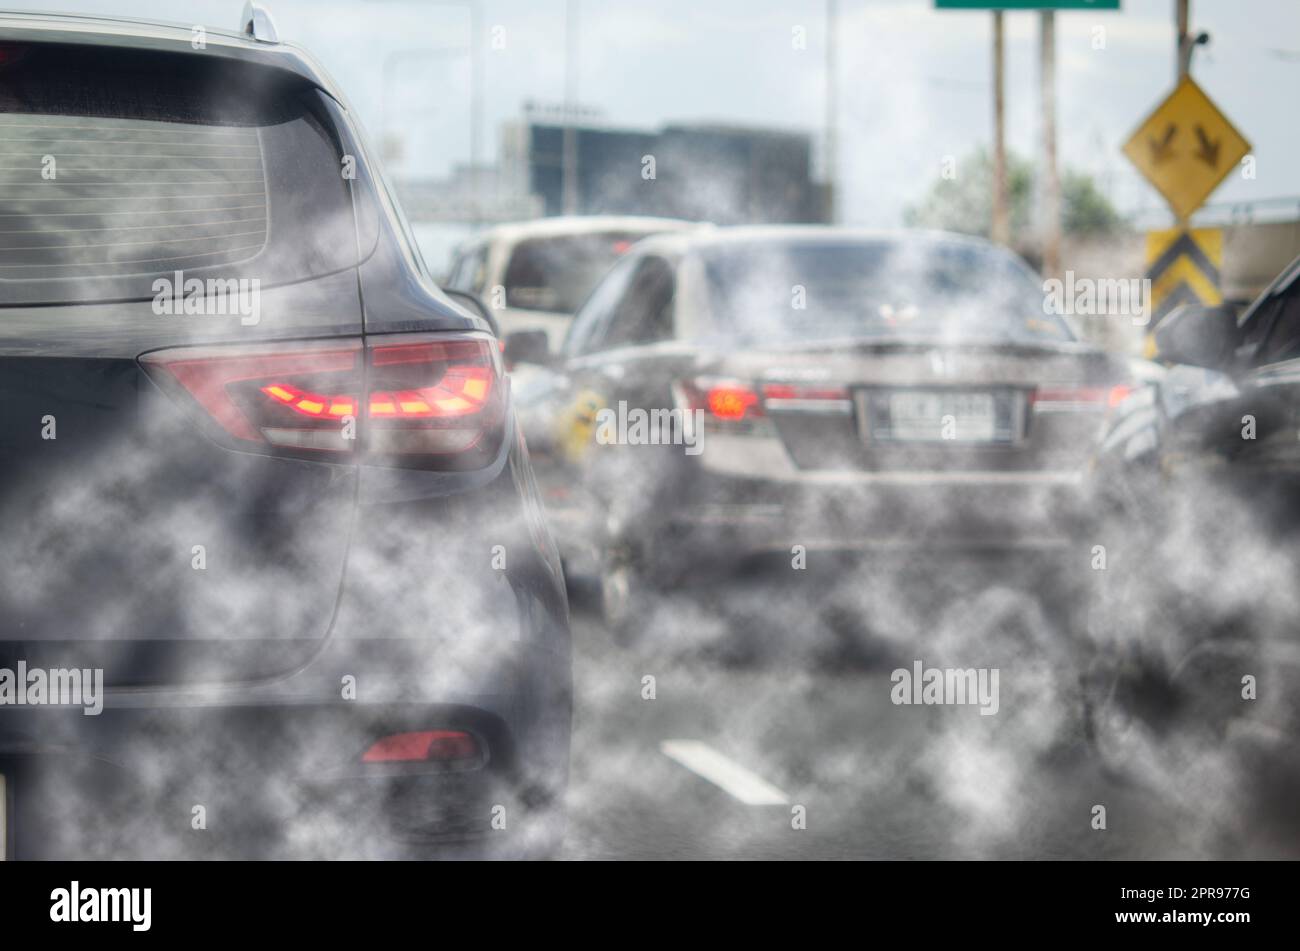 Car exhaust fumes during traffic jams on the road cause environmental ...